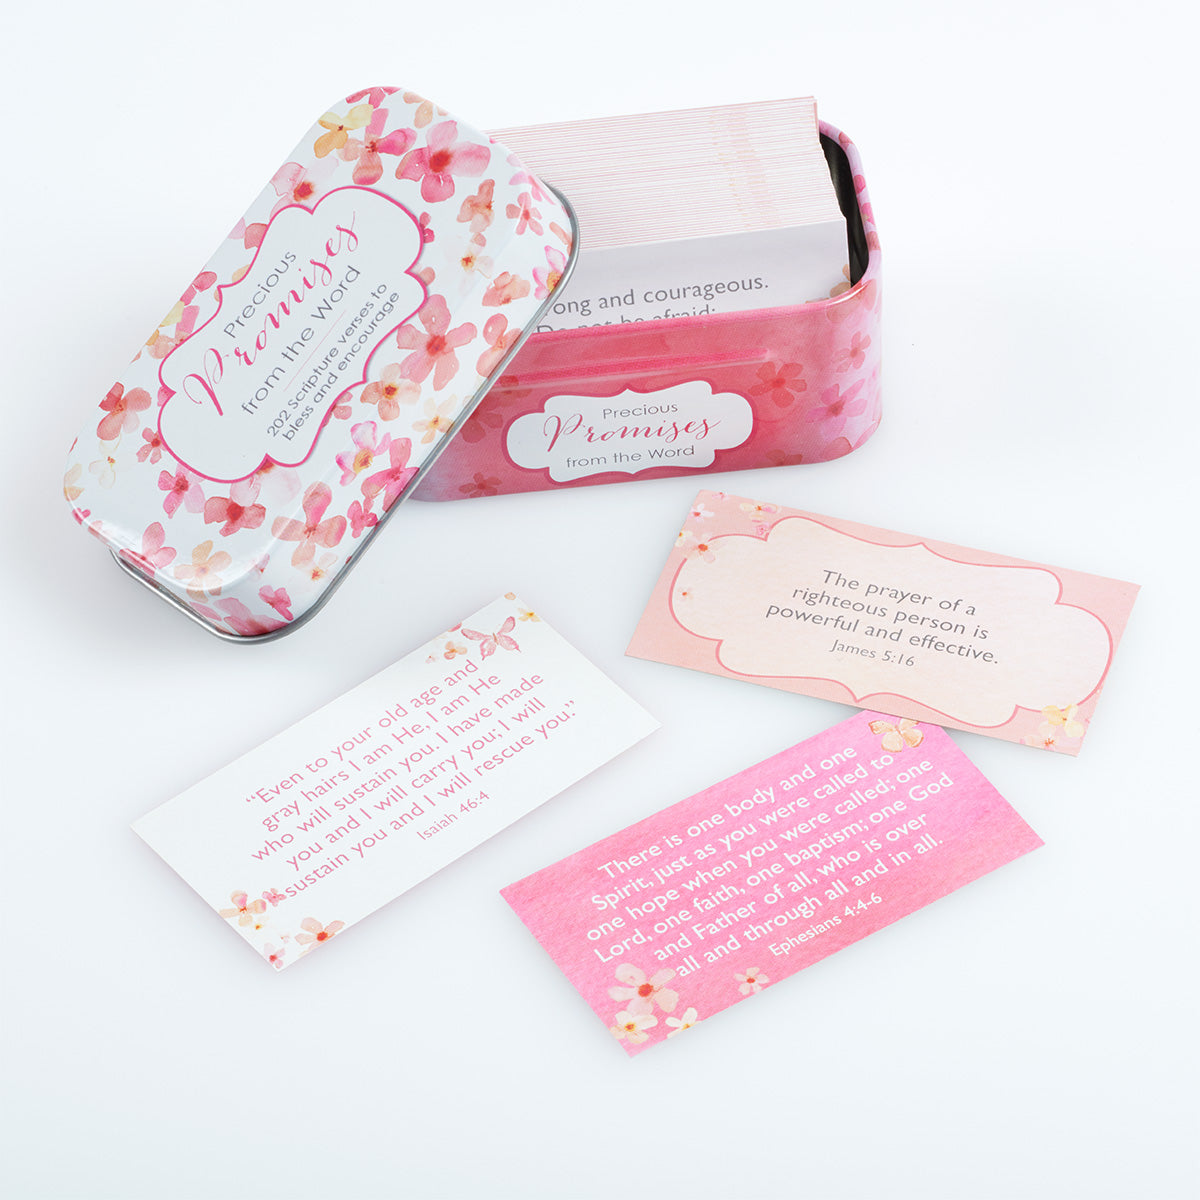 Precious Promises from the Word Scripture Promise Cards in a Gift Tin - The Christian Gift Company